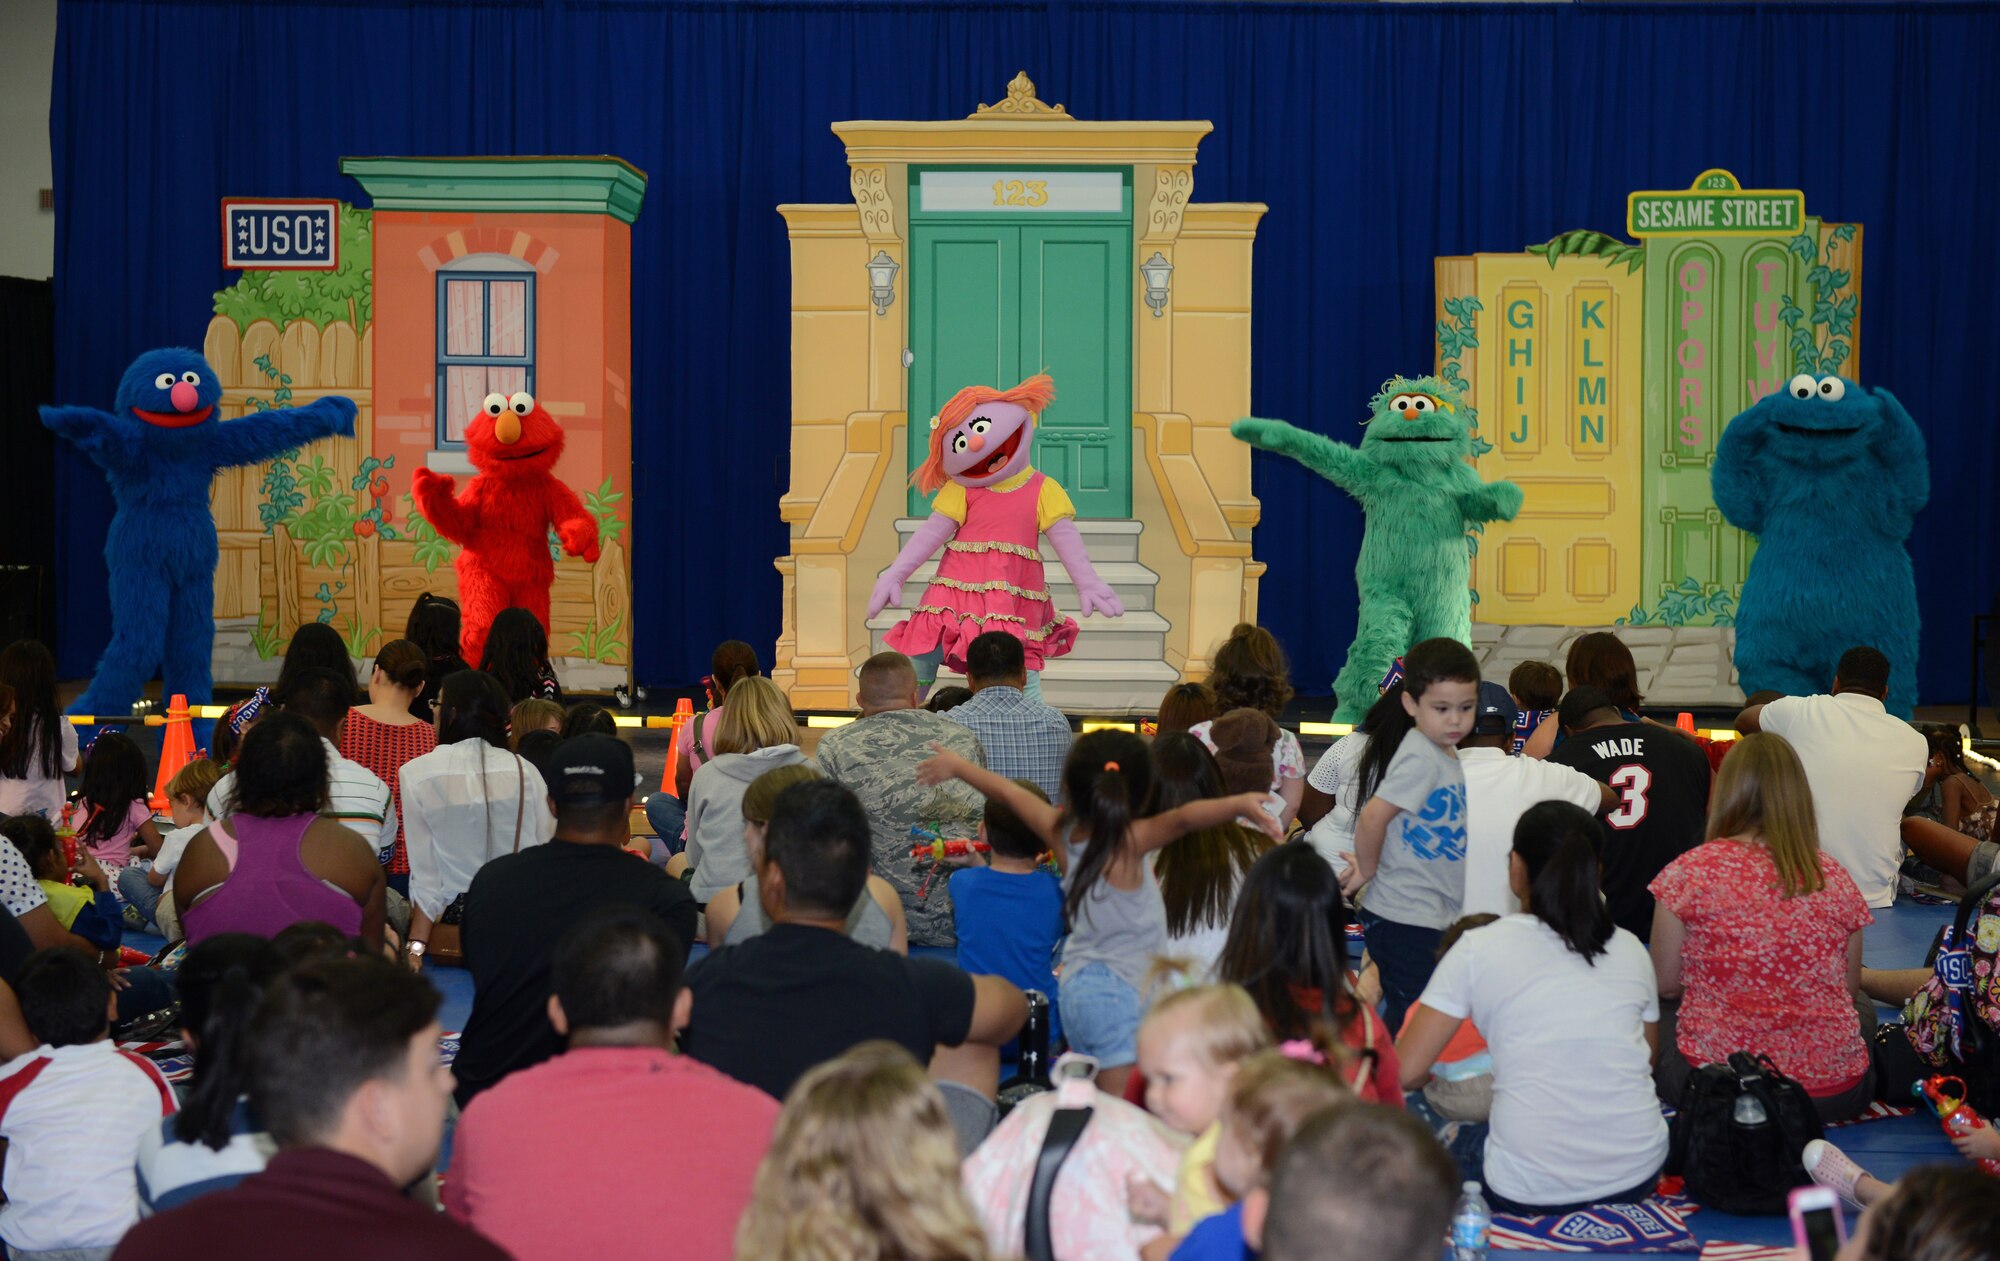 Characters from Sesame Street perform for military families during the Sesame Street United Service Organizations Experience for Military Families tour Sept. 19, 2015, on Andersen Air Force Base, Guam. The cast is scheduled to perform at more than 100 shows at 45 military bases in 9 countries this year. (U.S. Air Force photo by Airman 1st Class Arielle Vasquez/Released)